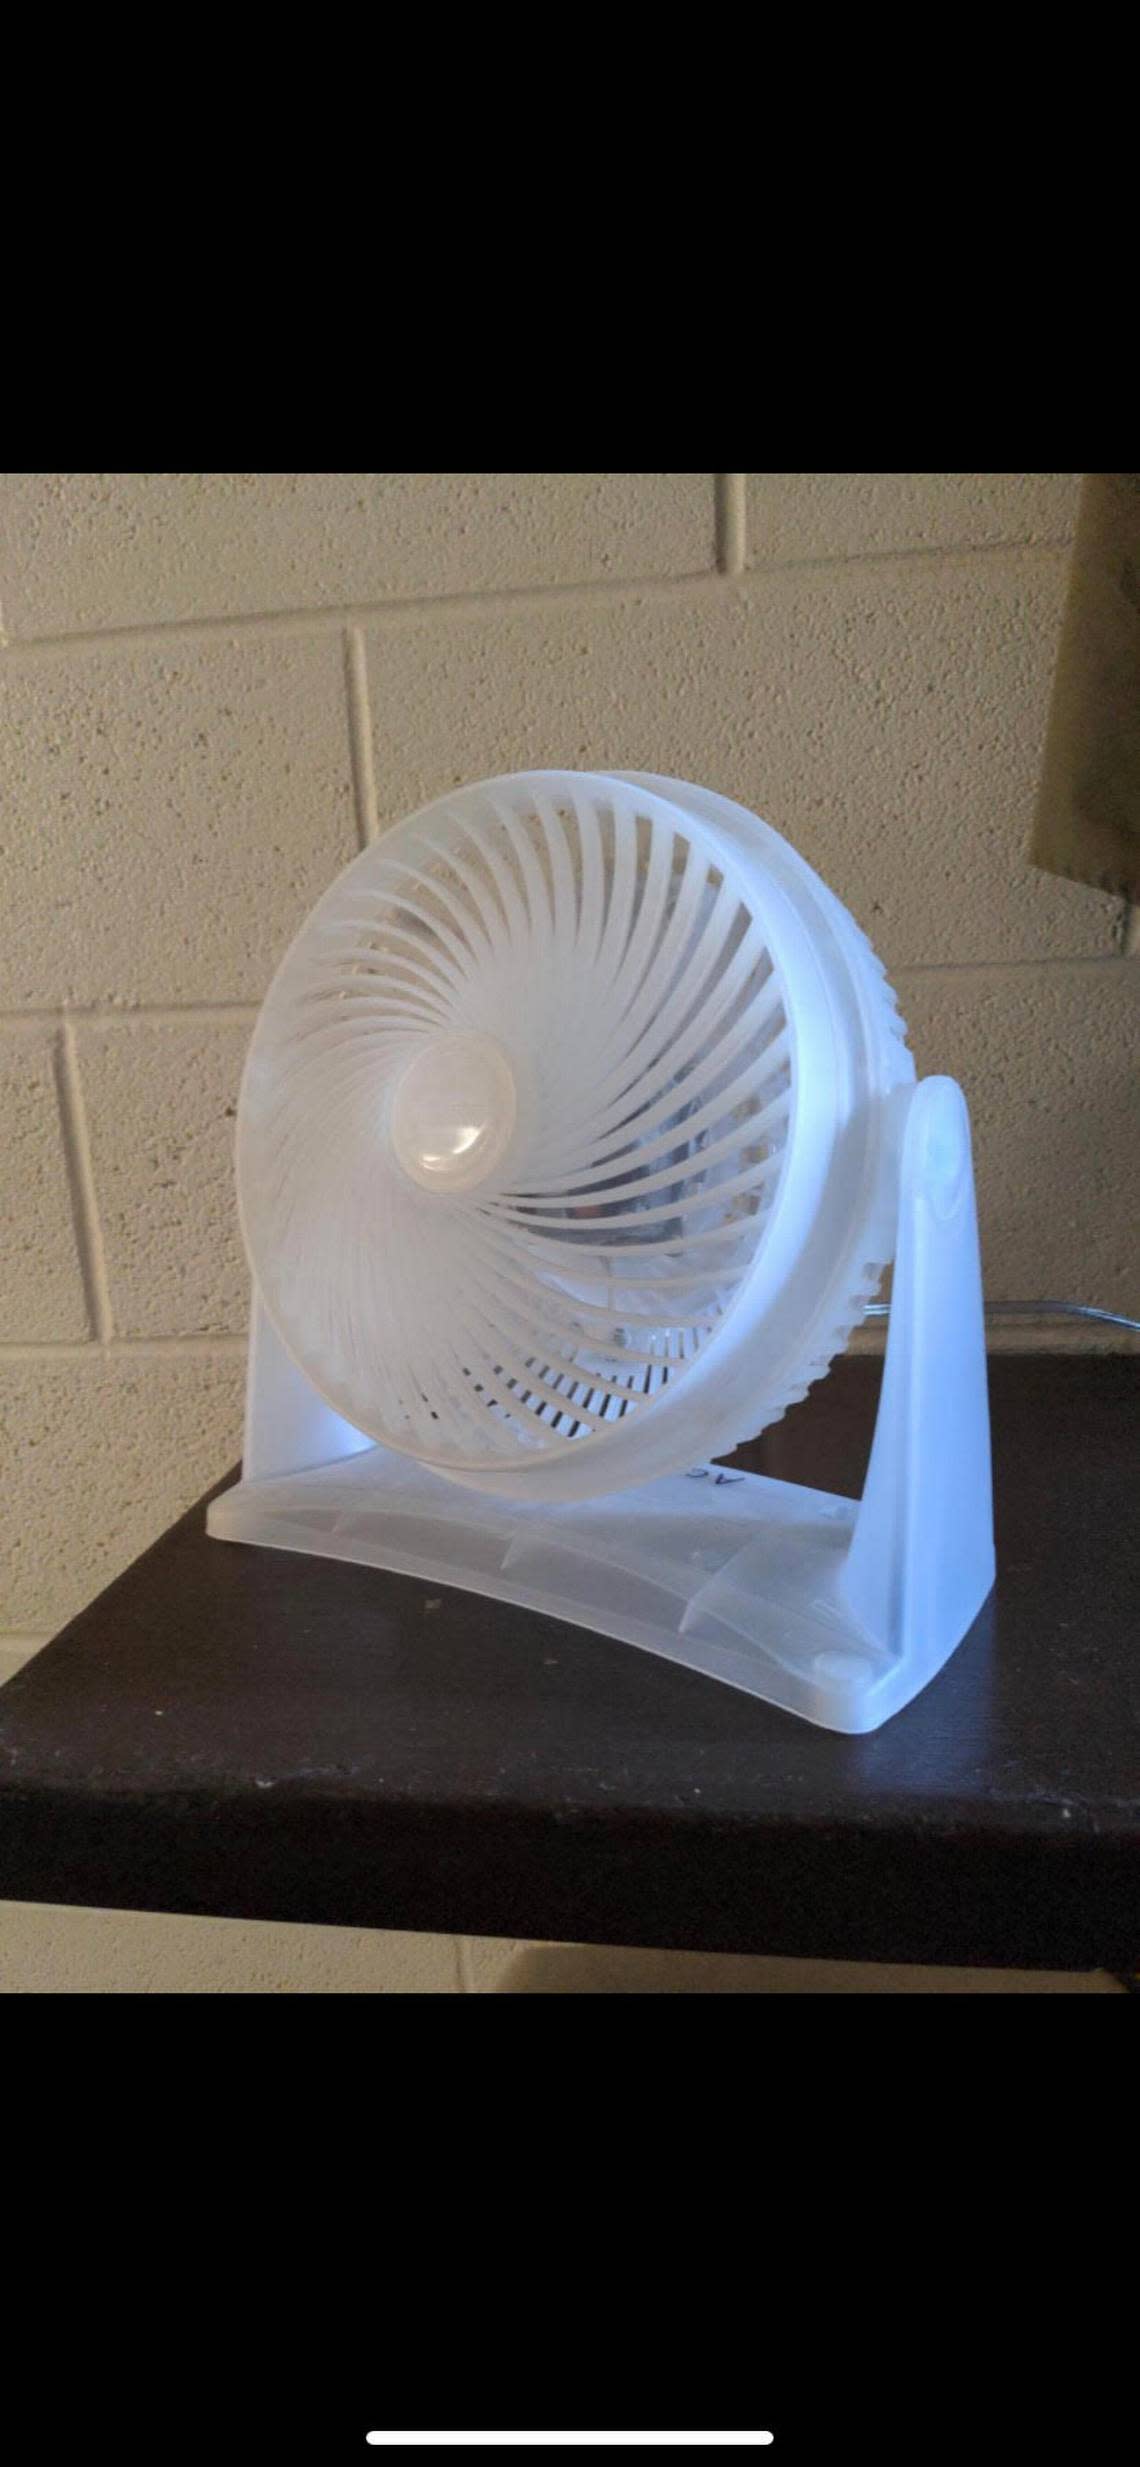 A desk fan at FCI Seagoville, where four of the seven buildings do not have air conditioning, costs $30.70.